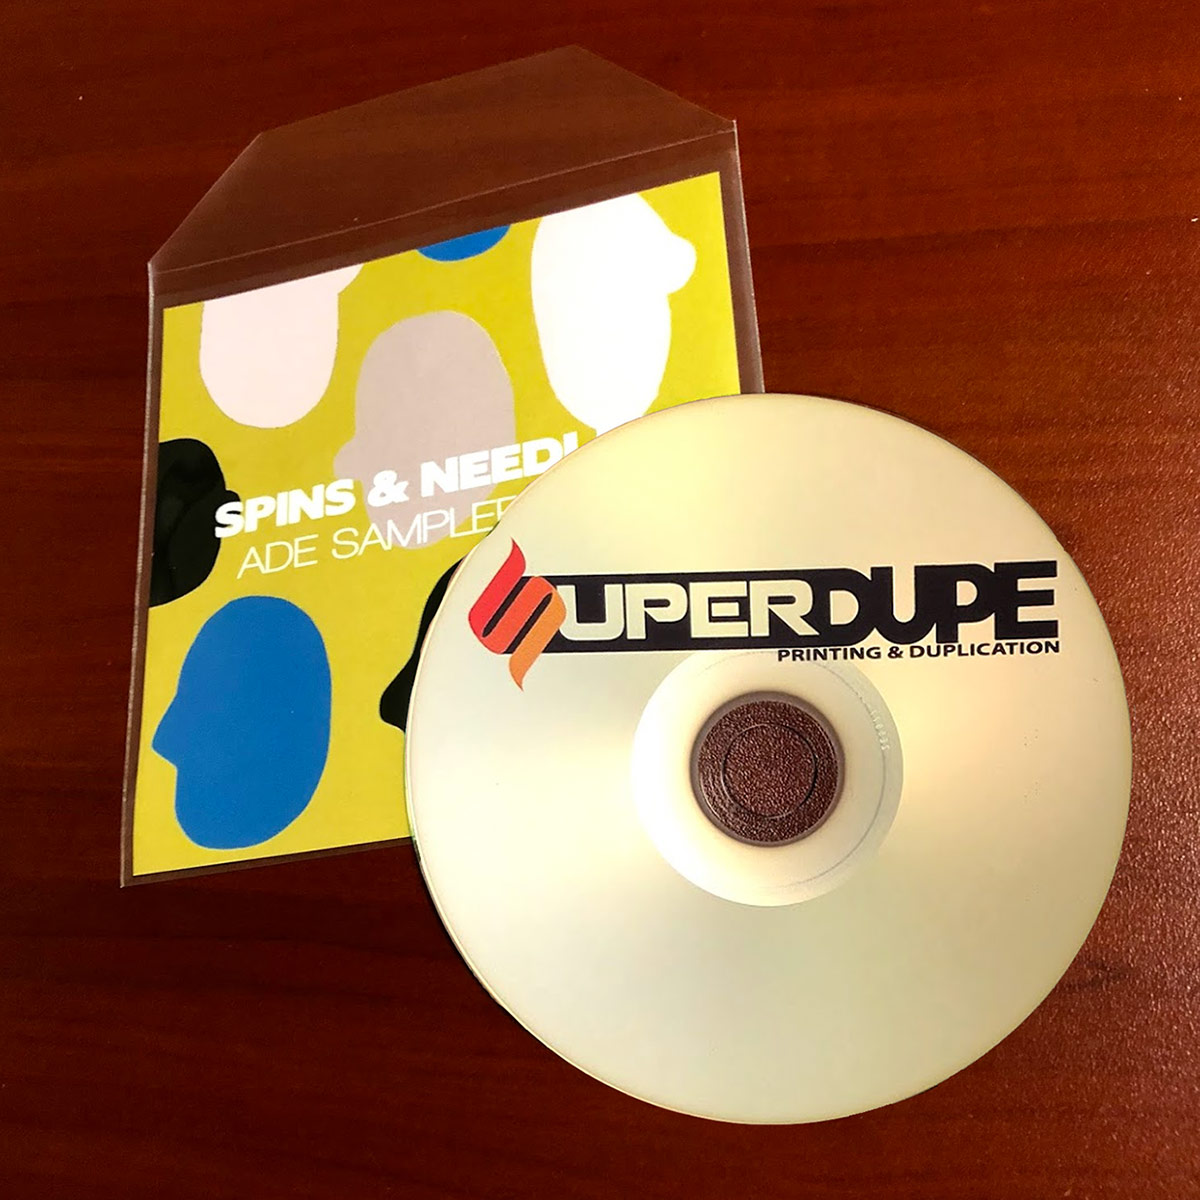 Demo CD Package With Silver Discs, Sleeve, and Cover